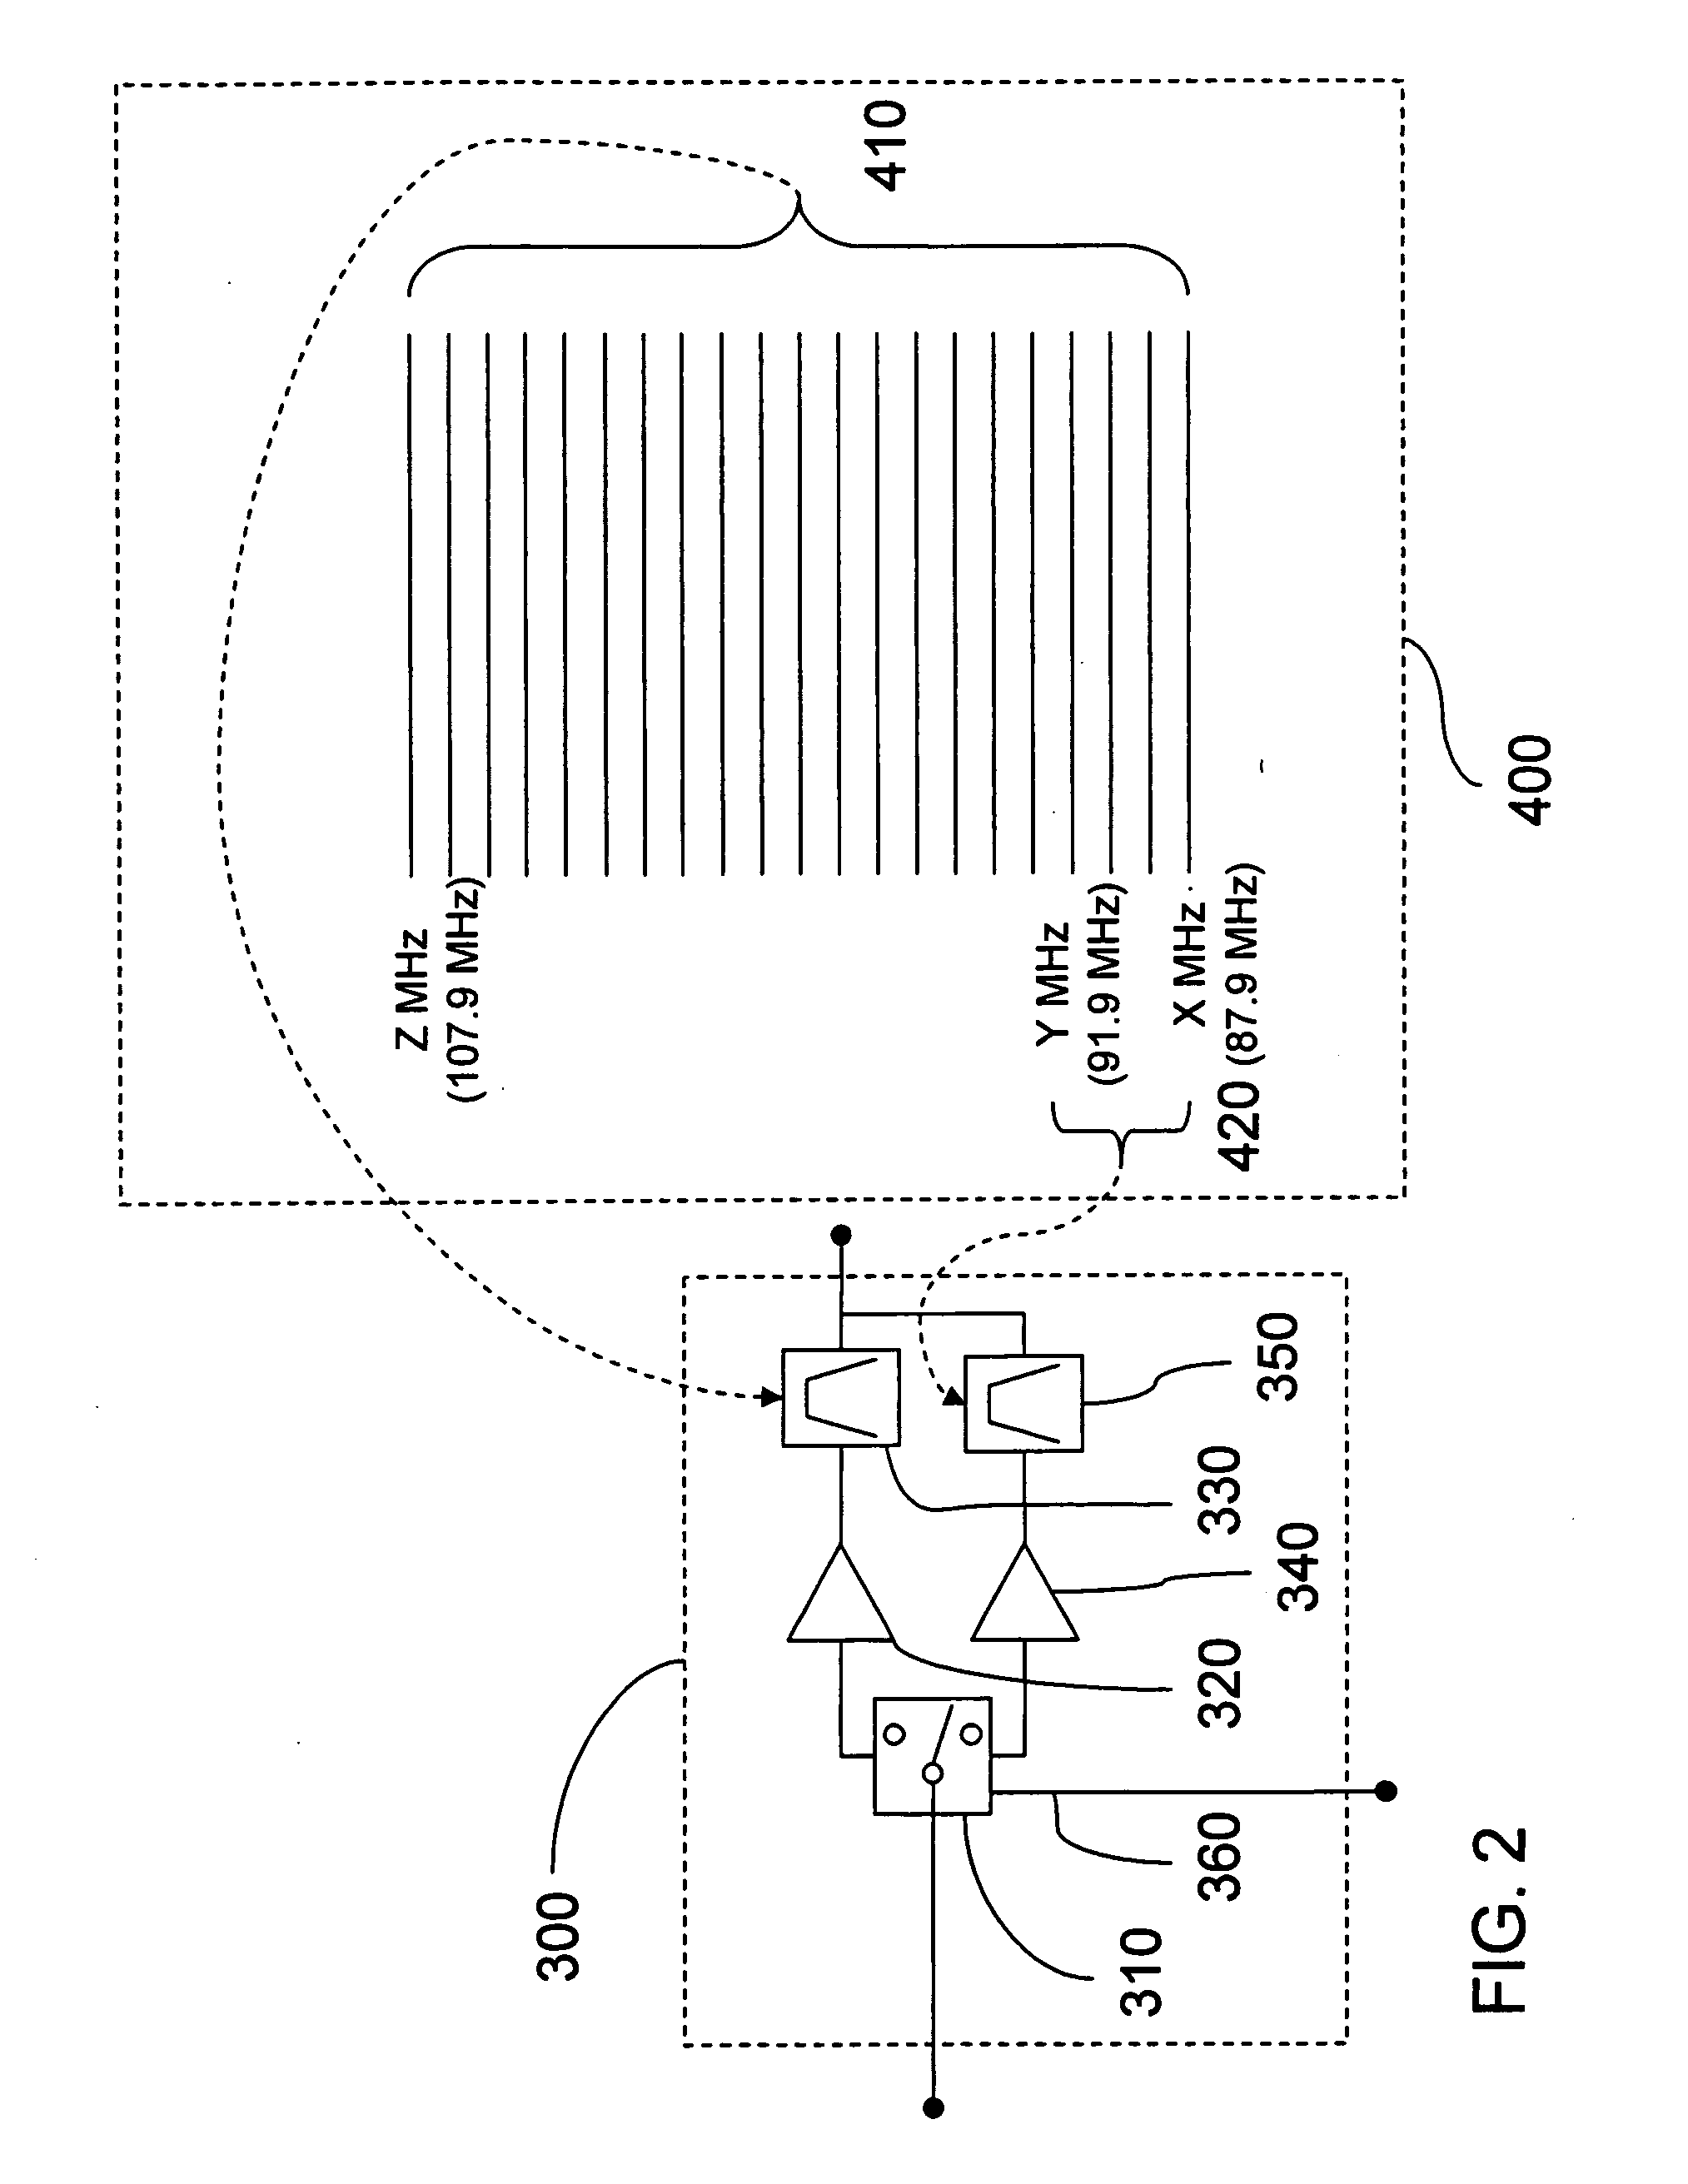 Radio receiver and reserved band filter